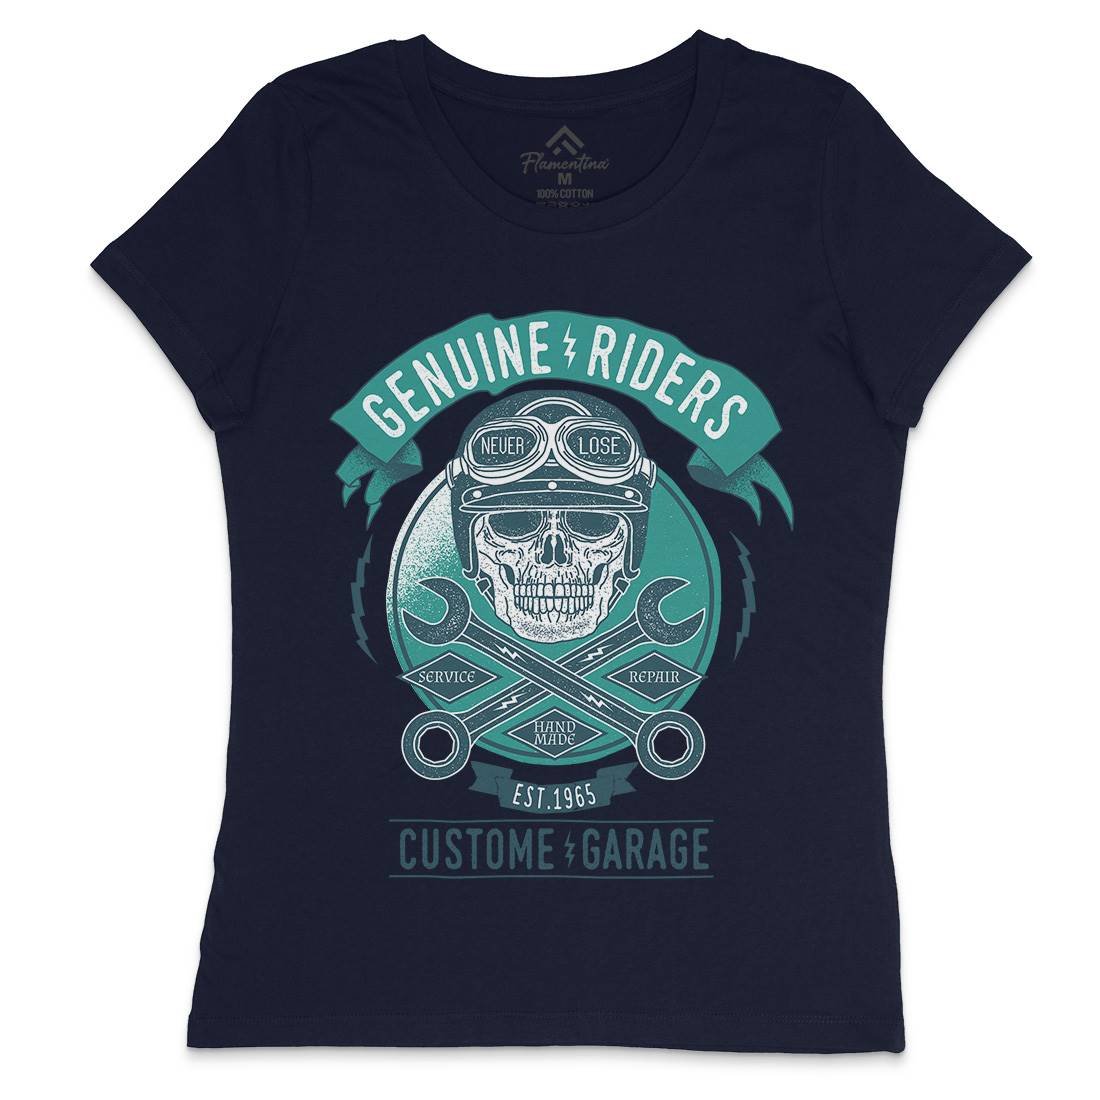 Genuine Riders Womens Crew Neck T-Shirt Motorcycles A984